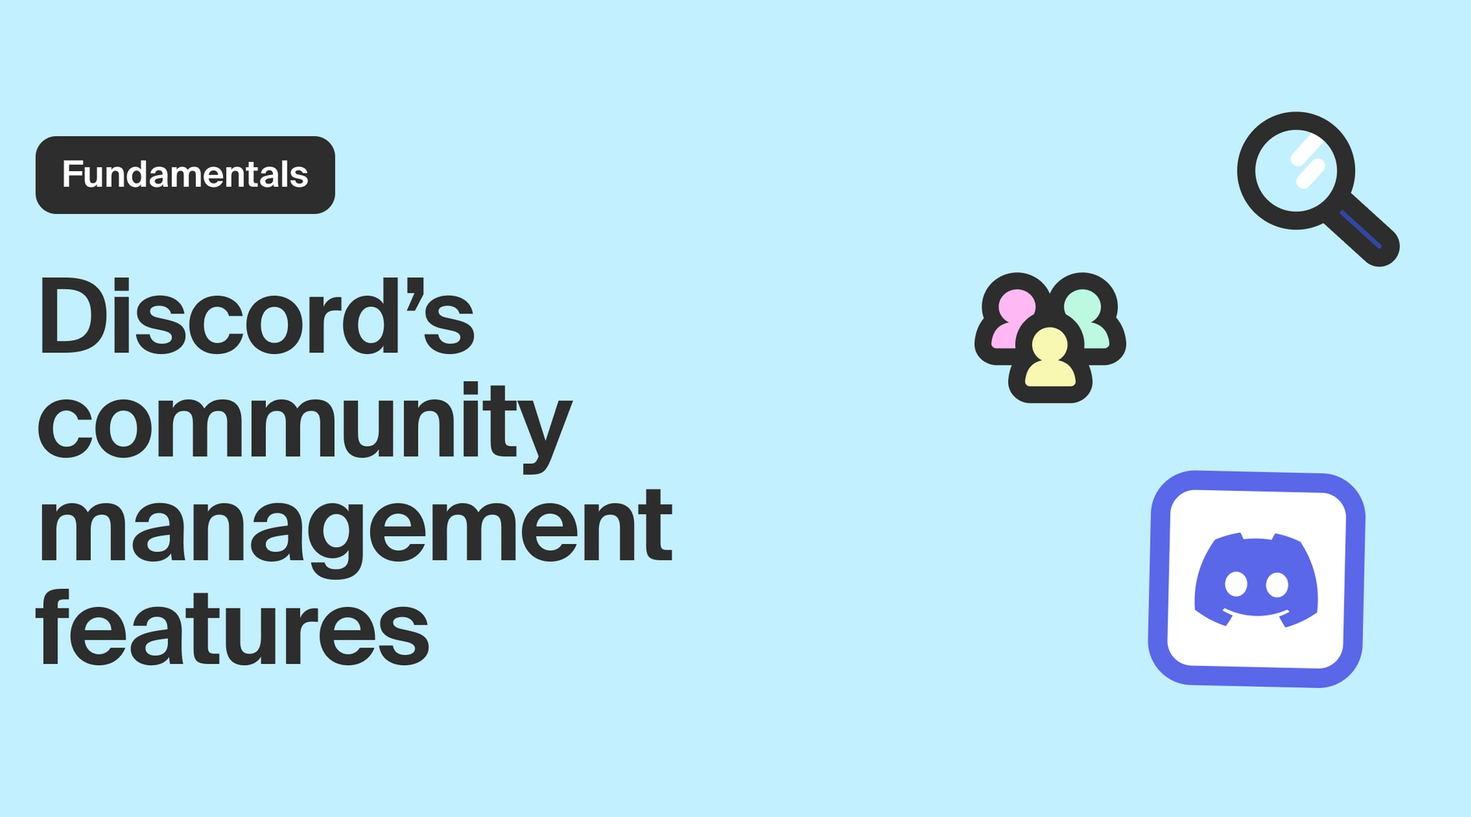 An overview of Discord’s community management features